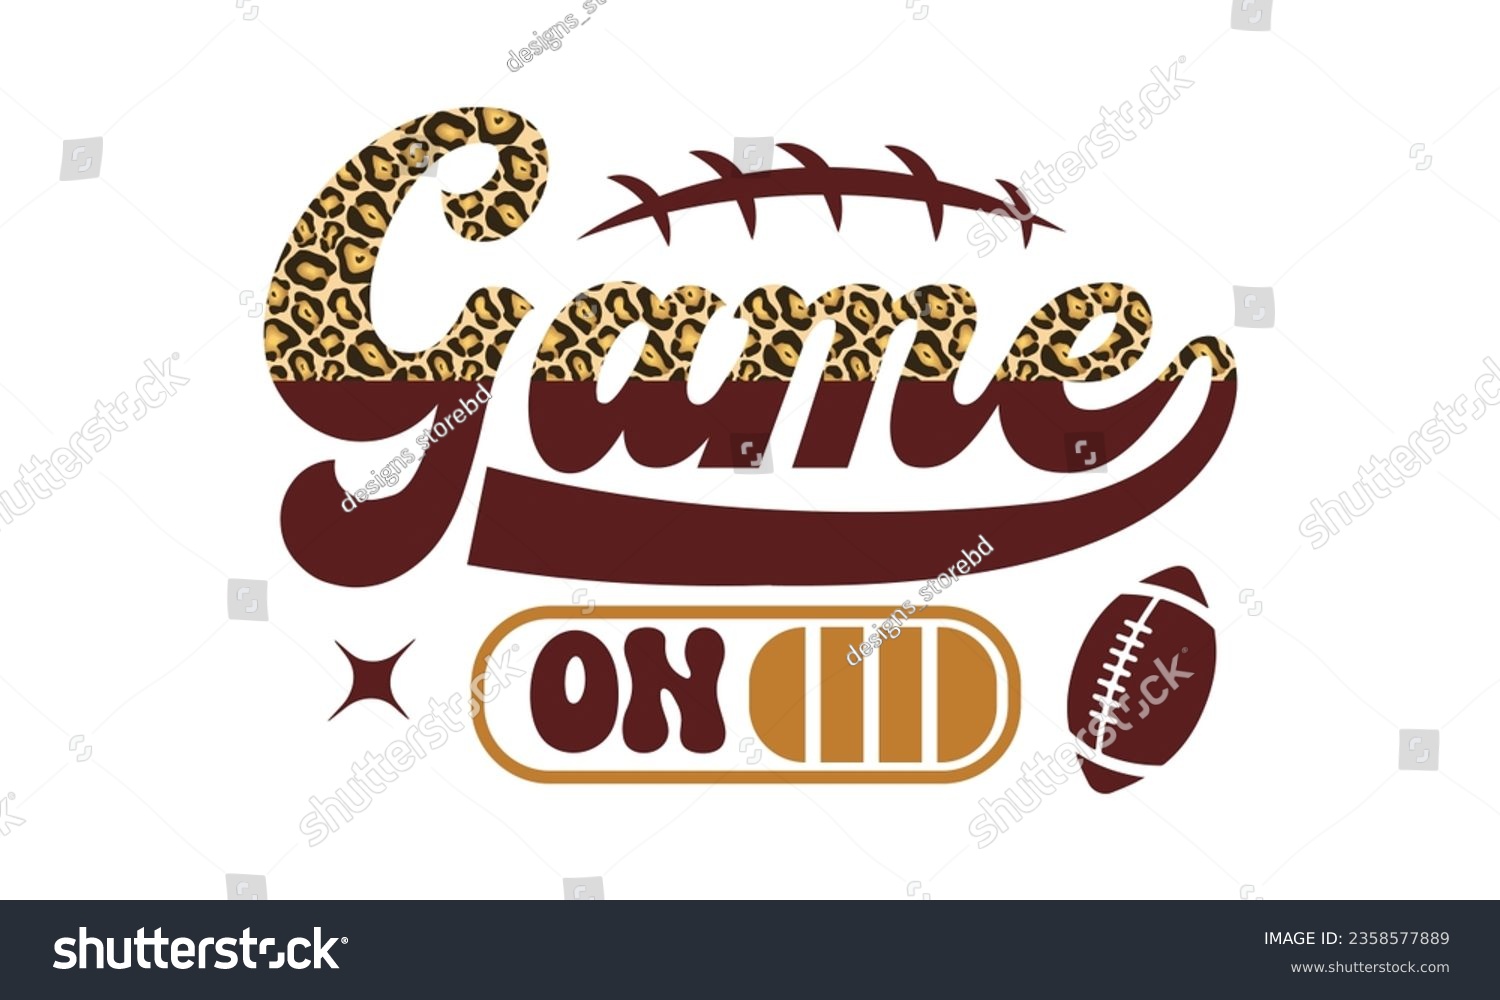 SVG of Game on svg, Football SVG, Football T-shirt Design Template SVG Cut File Typography, Files for Cutting Cricut and Silhouette Cut svg File, Game Day eps, png svg